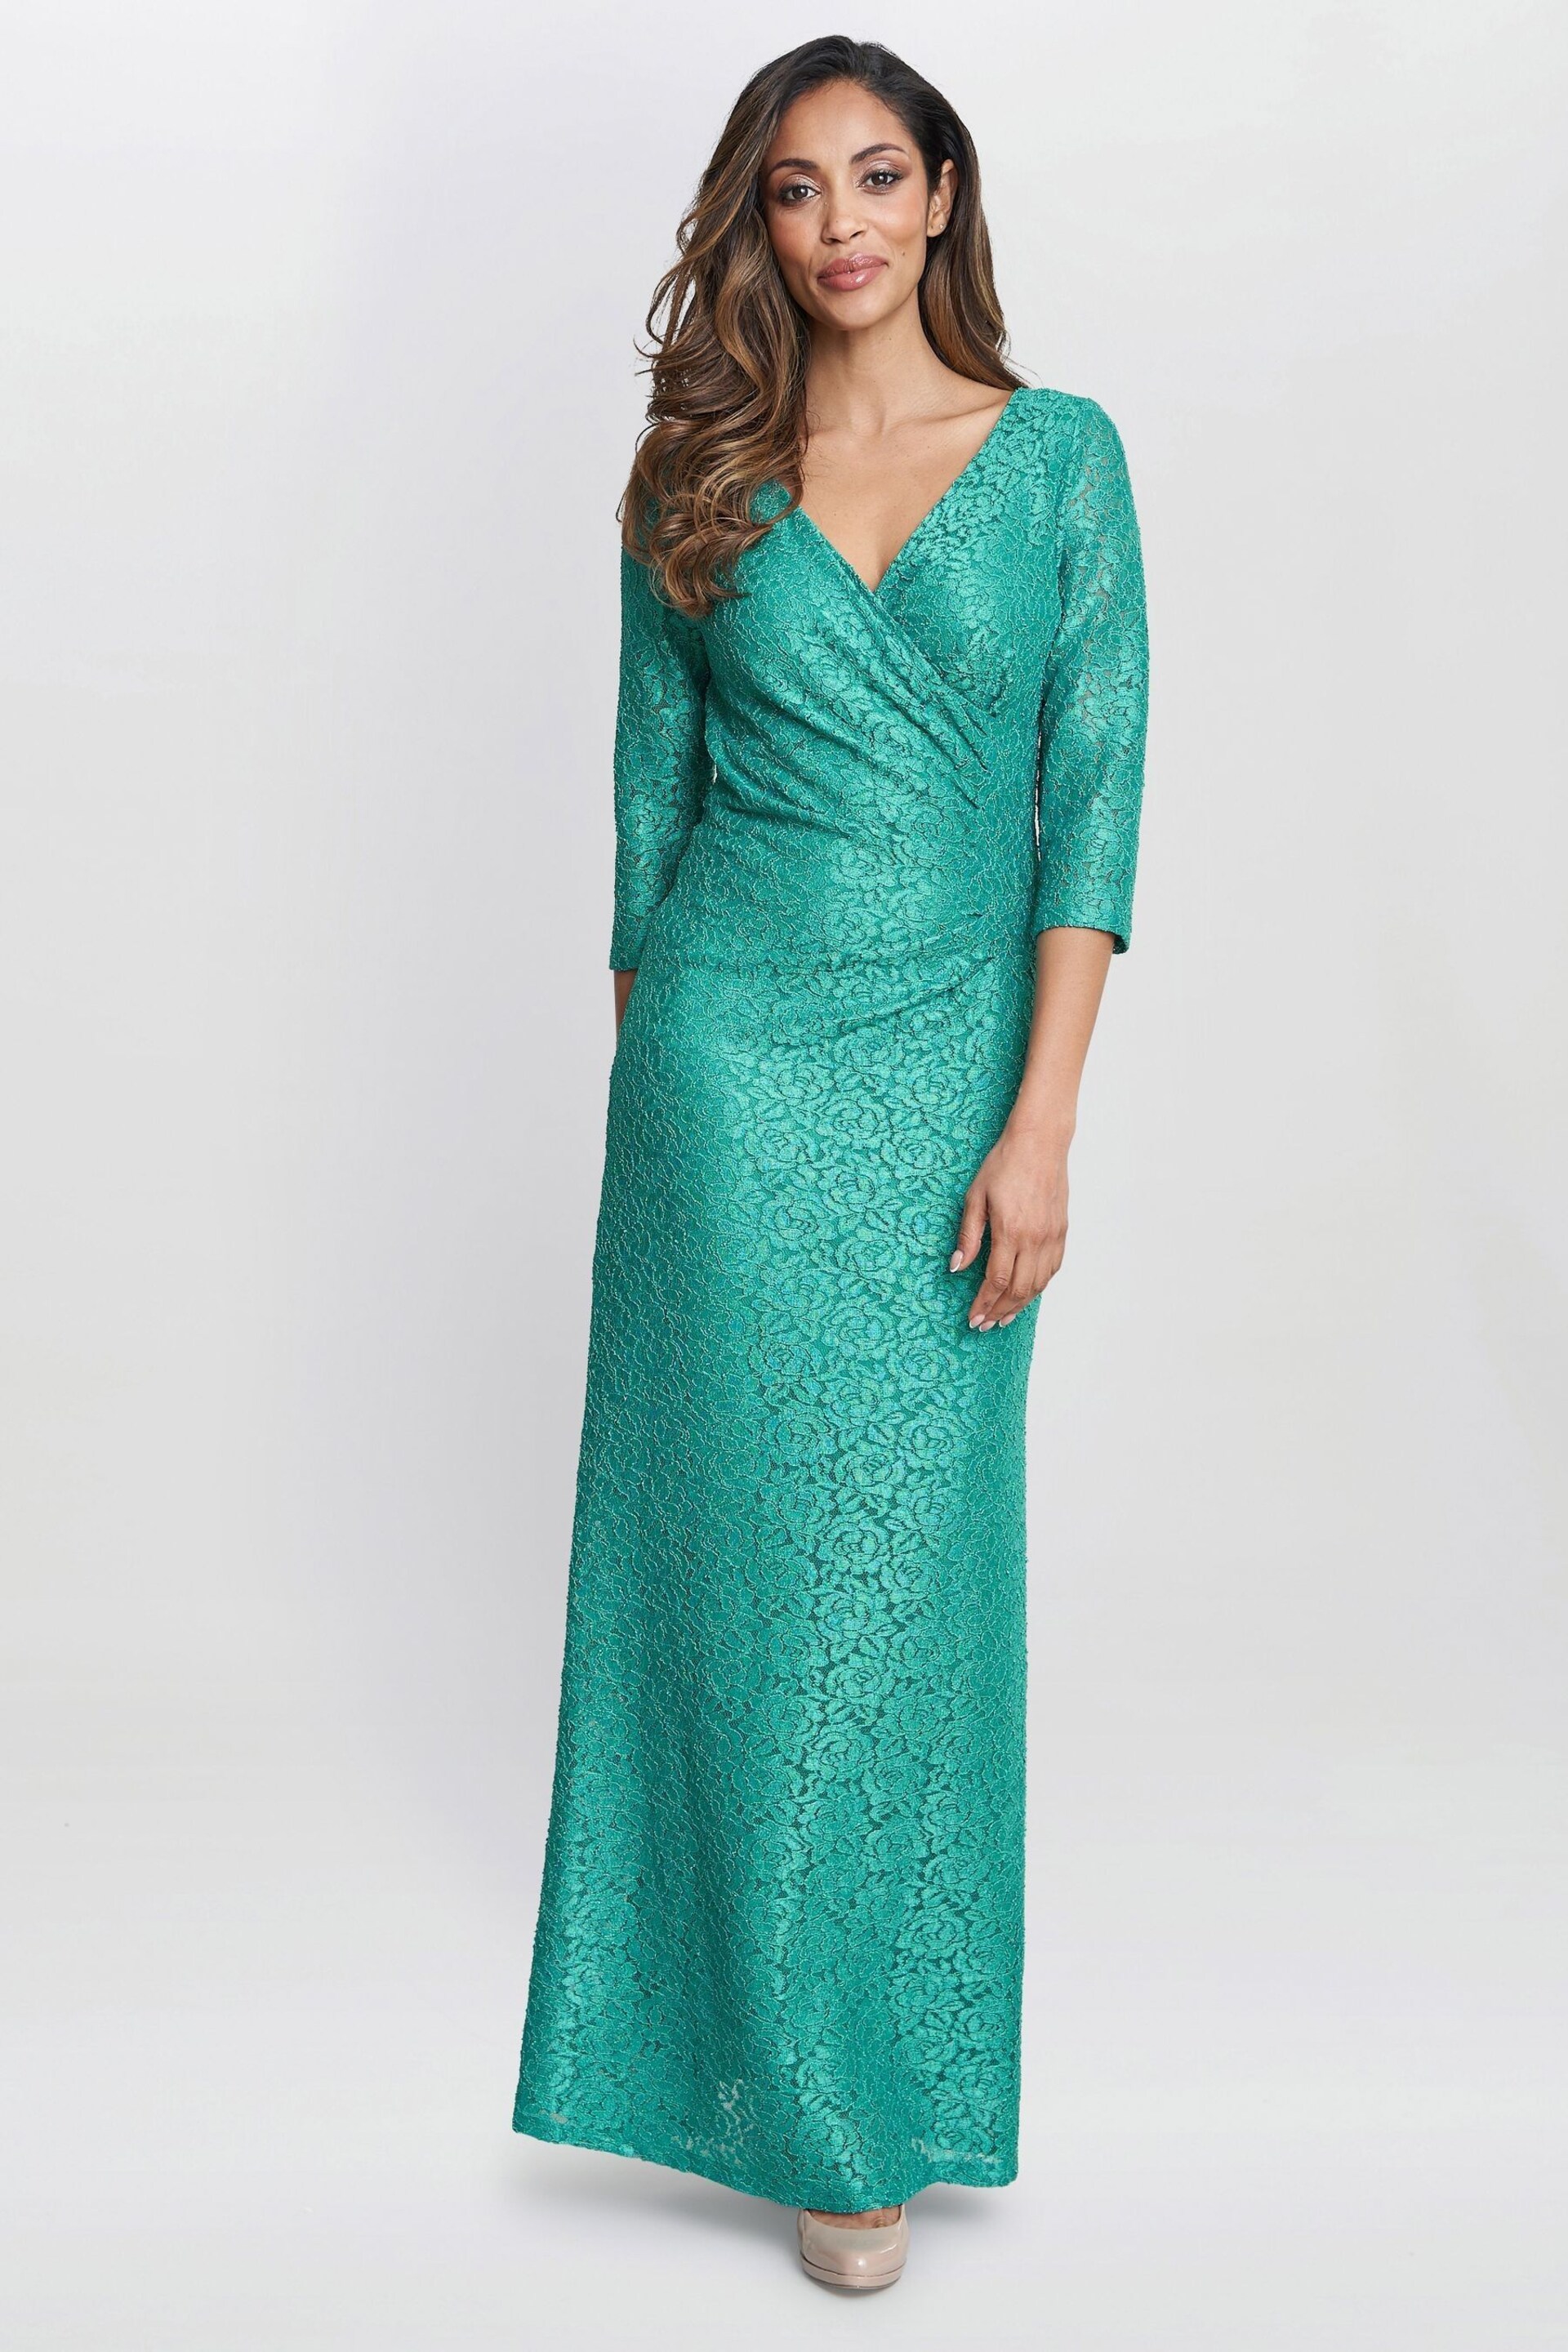 Gina Bacconi Green Fearne Lace Wrap Maxi Dress - Image 3 of 6